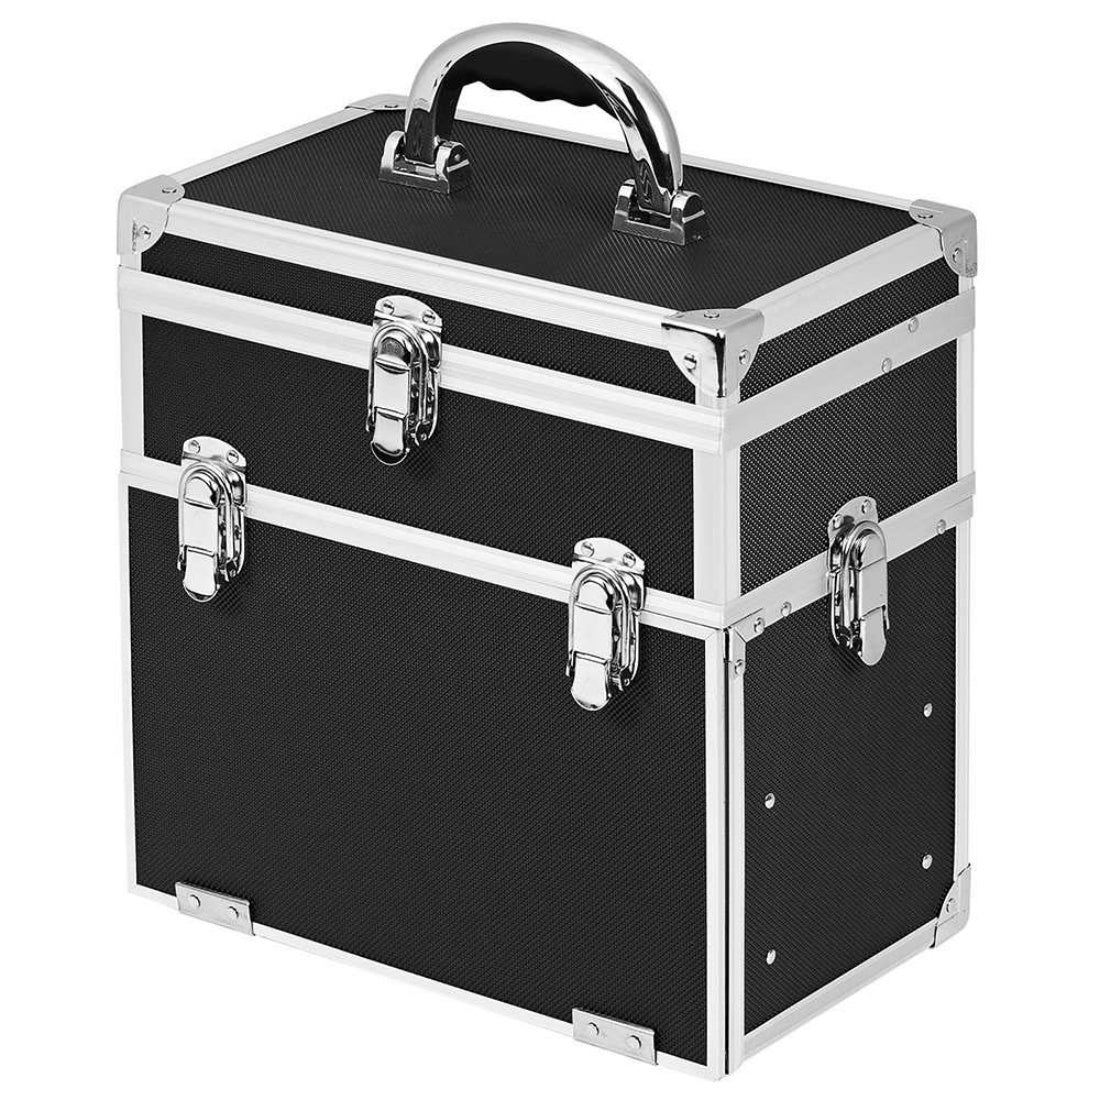 Portable 2in1 Makeup Case Cosmetic Carry Box